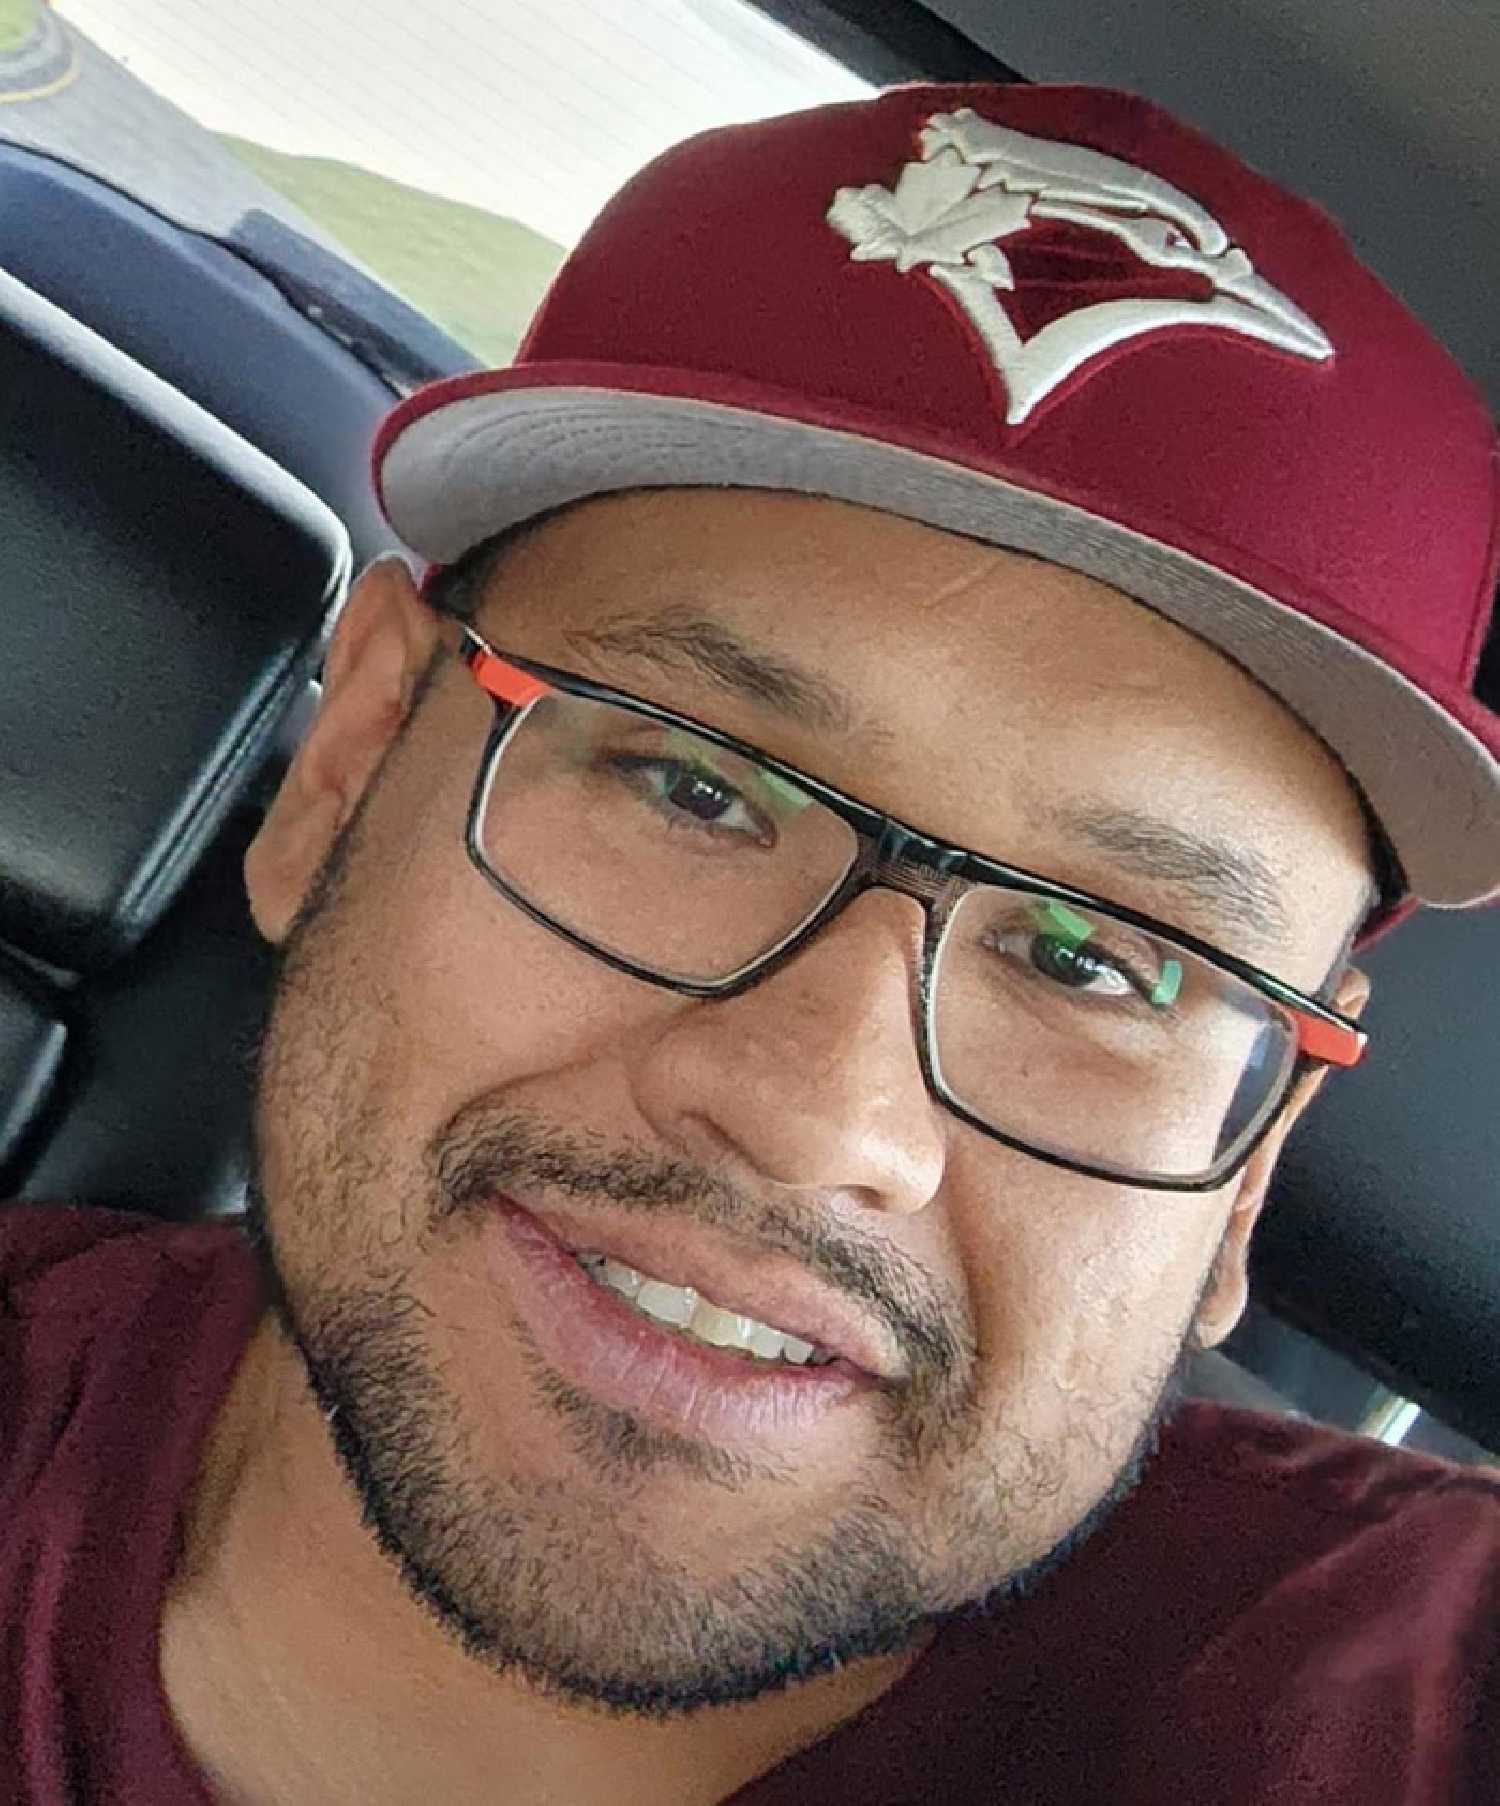 32-year-old Myles Sanderson (DOB: 1990-02-02) is involved in an active investigation for multiple homicides which occurred on September 4, 2022, at the James Smith Cree Nation and Weldon. 